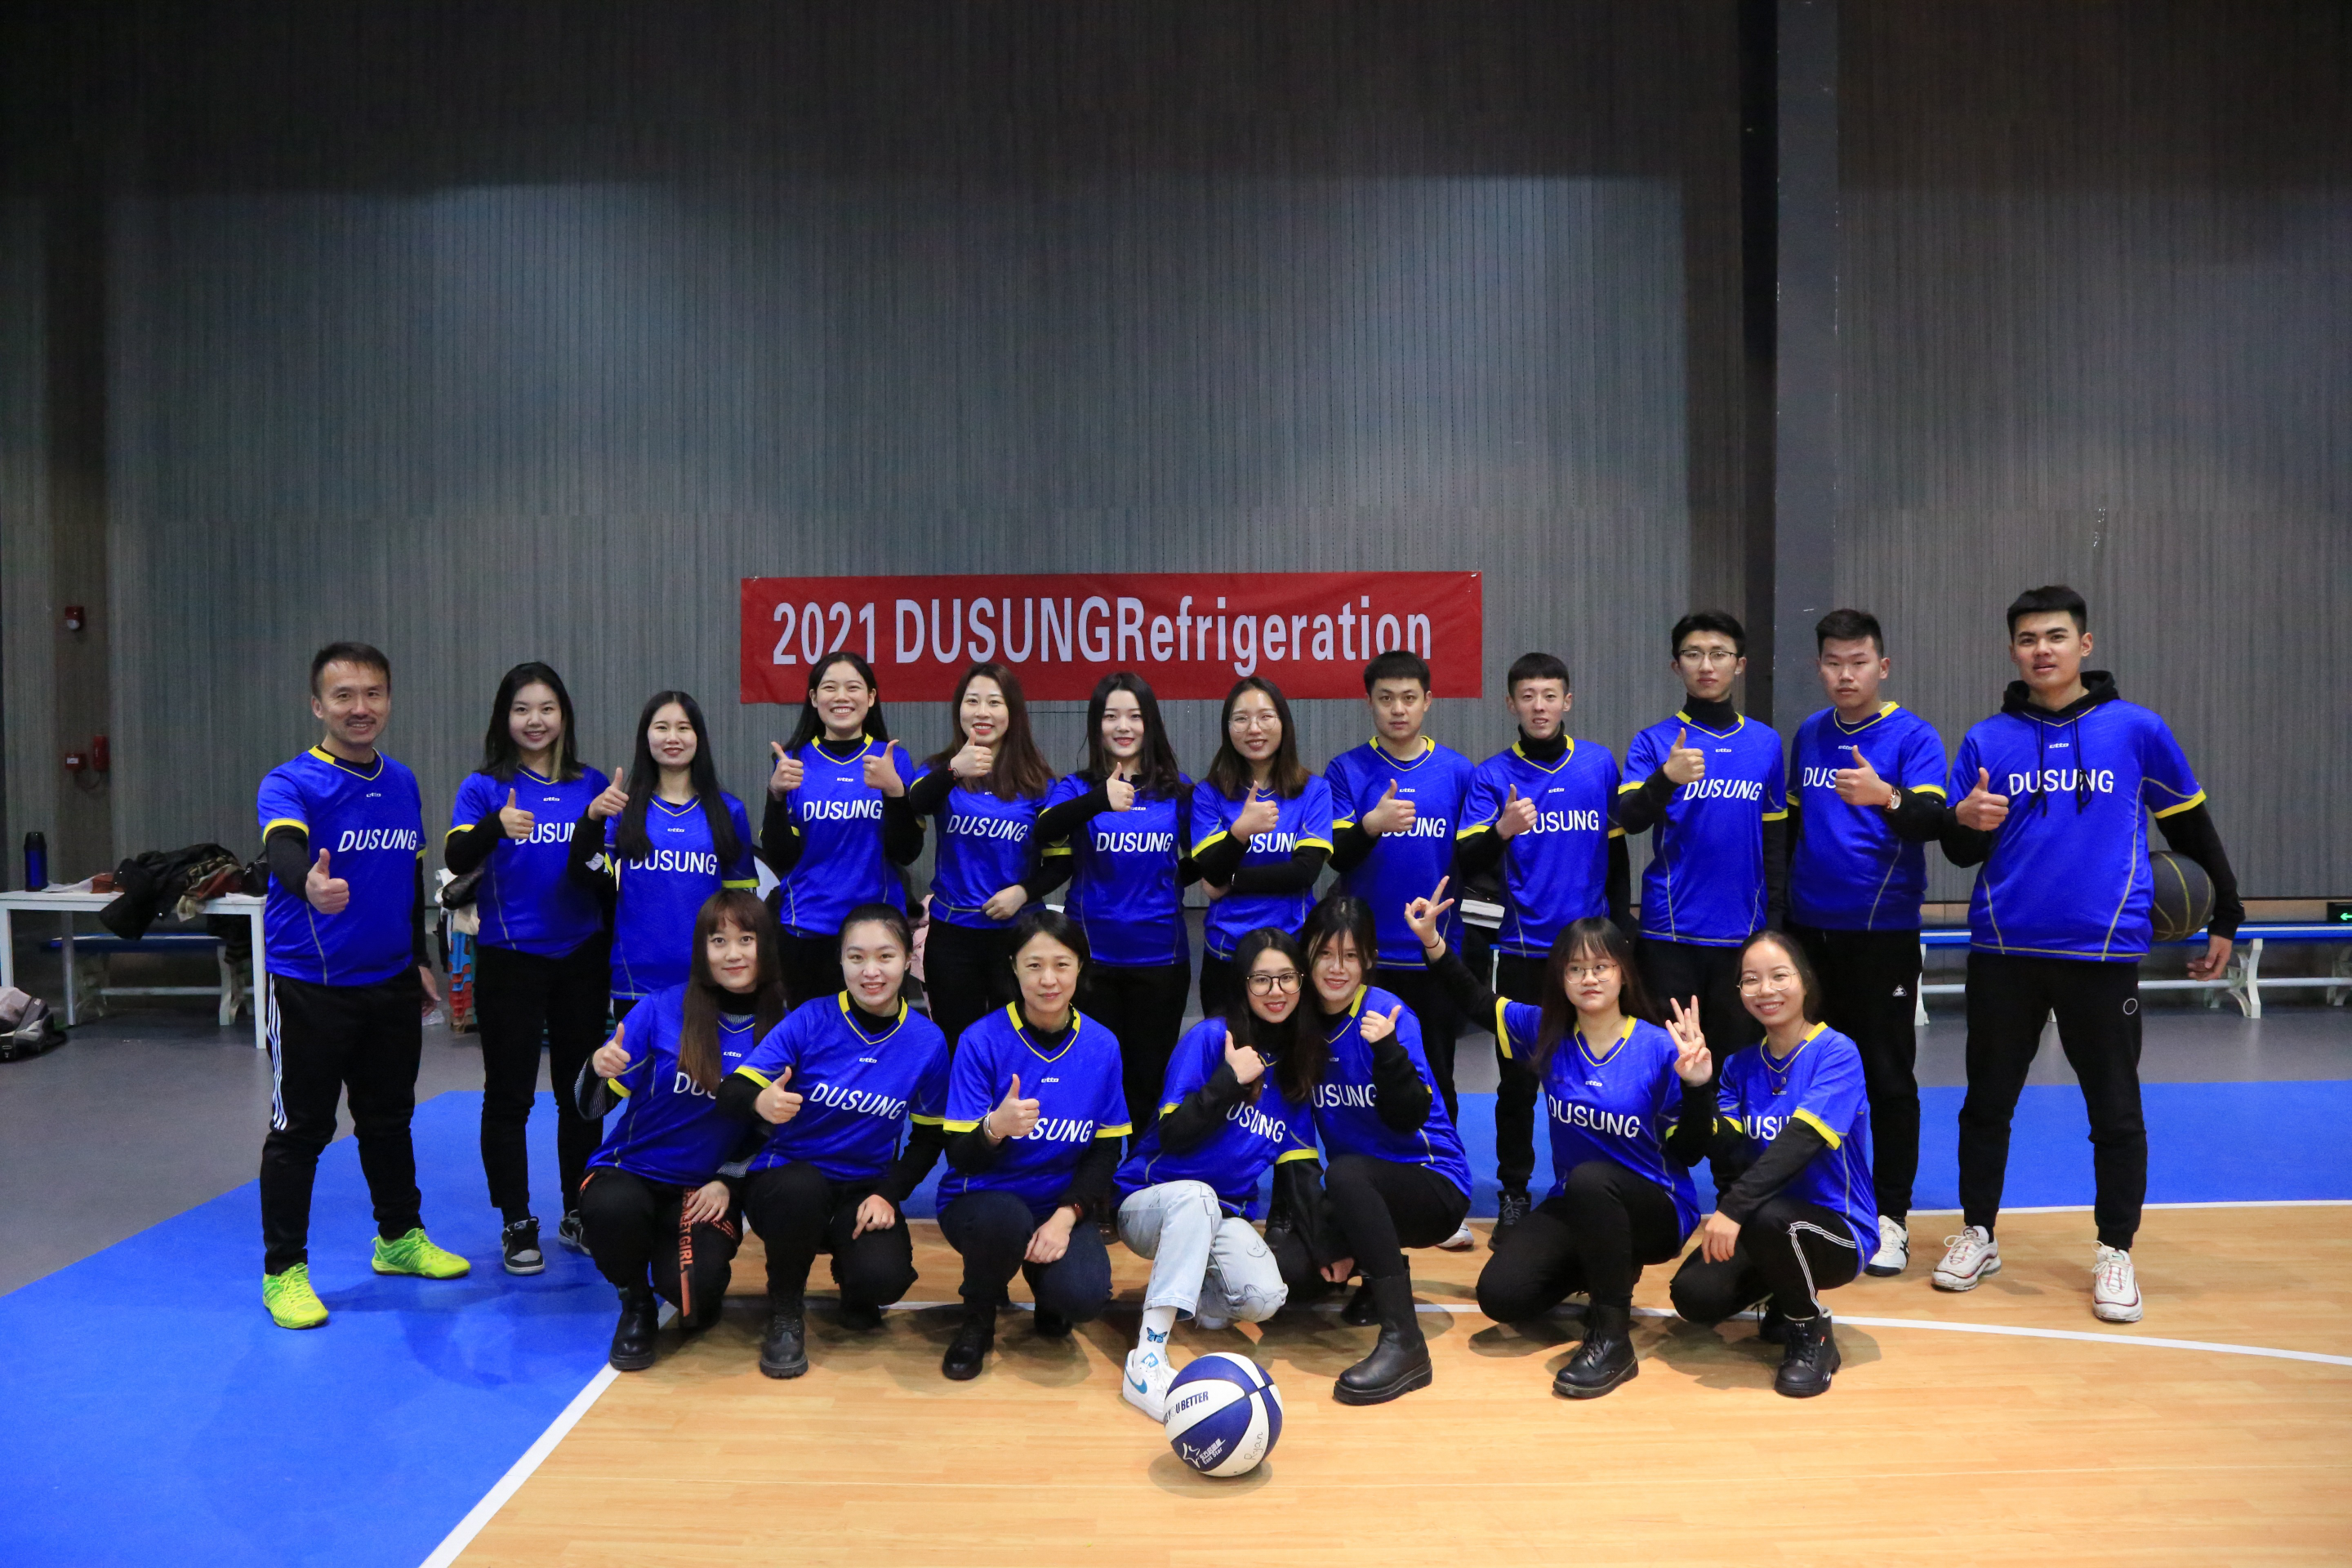 DUSUNG REFRIGERATION SPORTS DAY